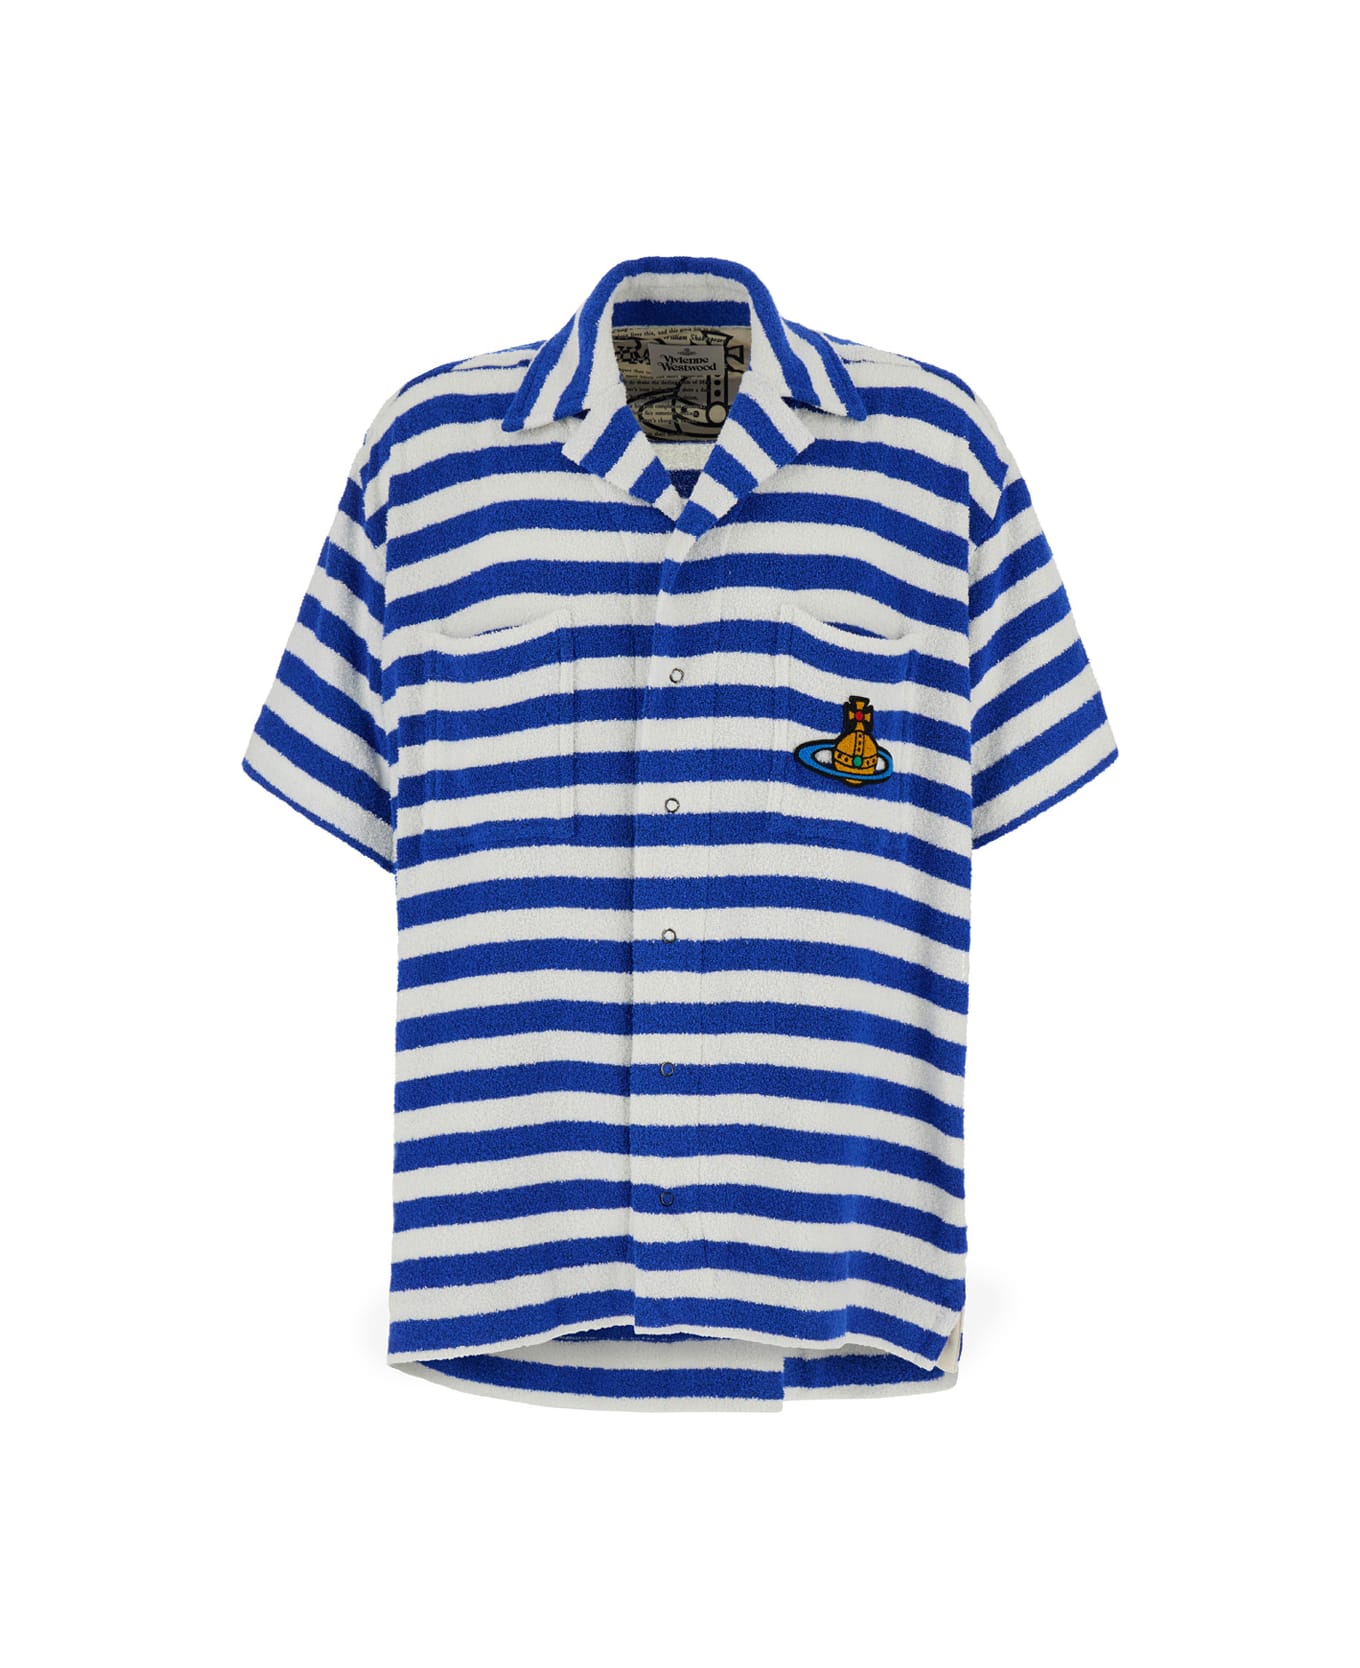 Vivienne Westwood Blue And White Striped Bowling Shirt With Orb Embroidery In Cotton Blend Man - WHITE シャツ